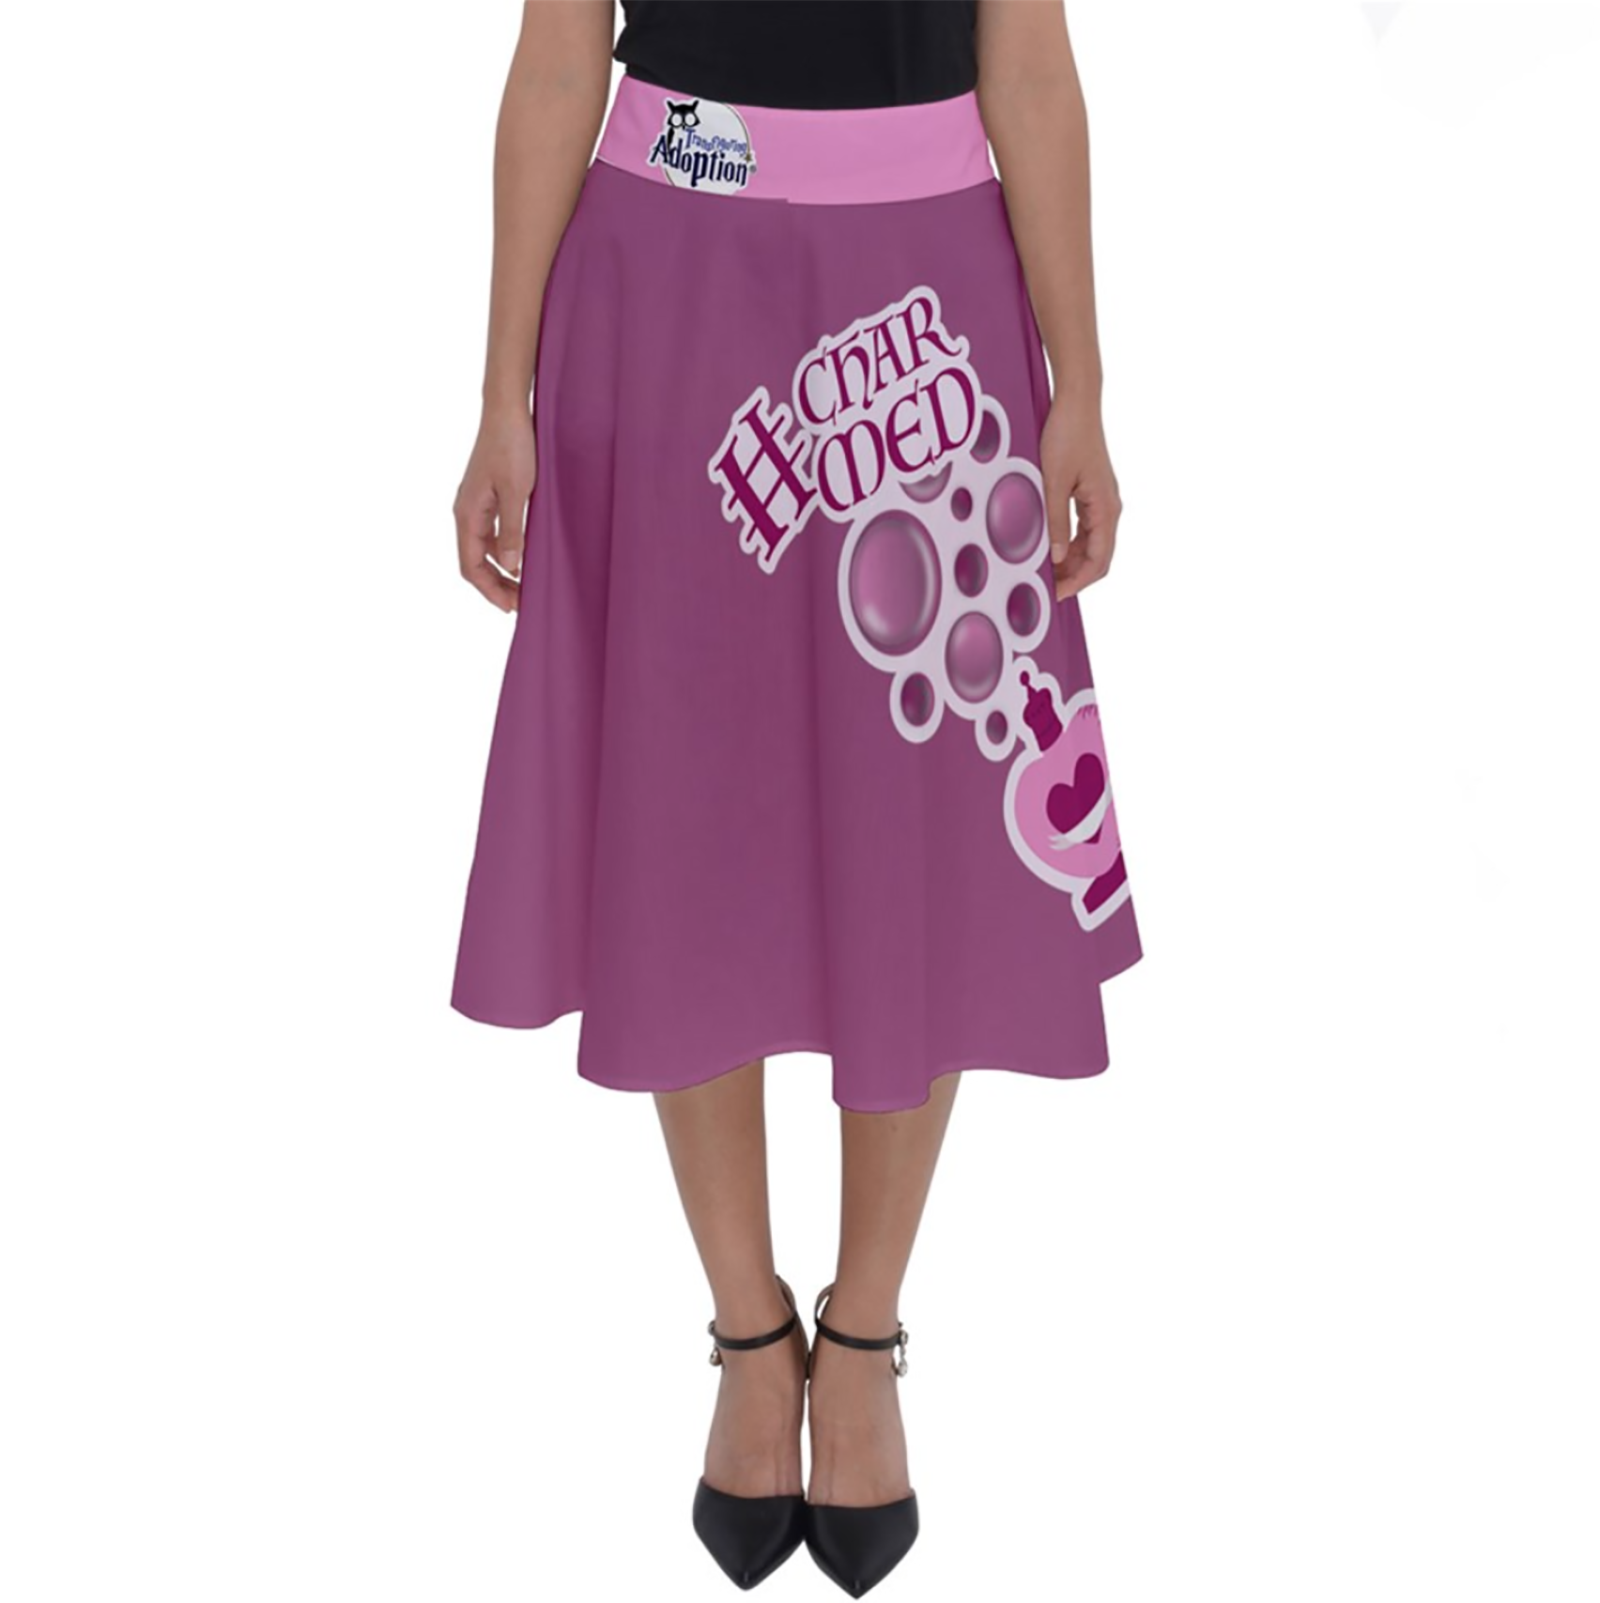 Charmed Perfect Length Midi Skirt (Pink Solid Colored)